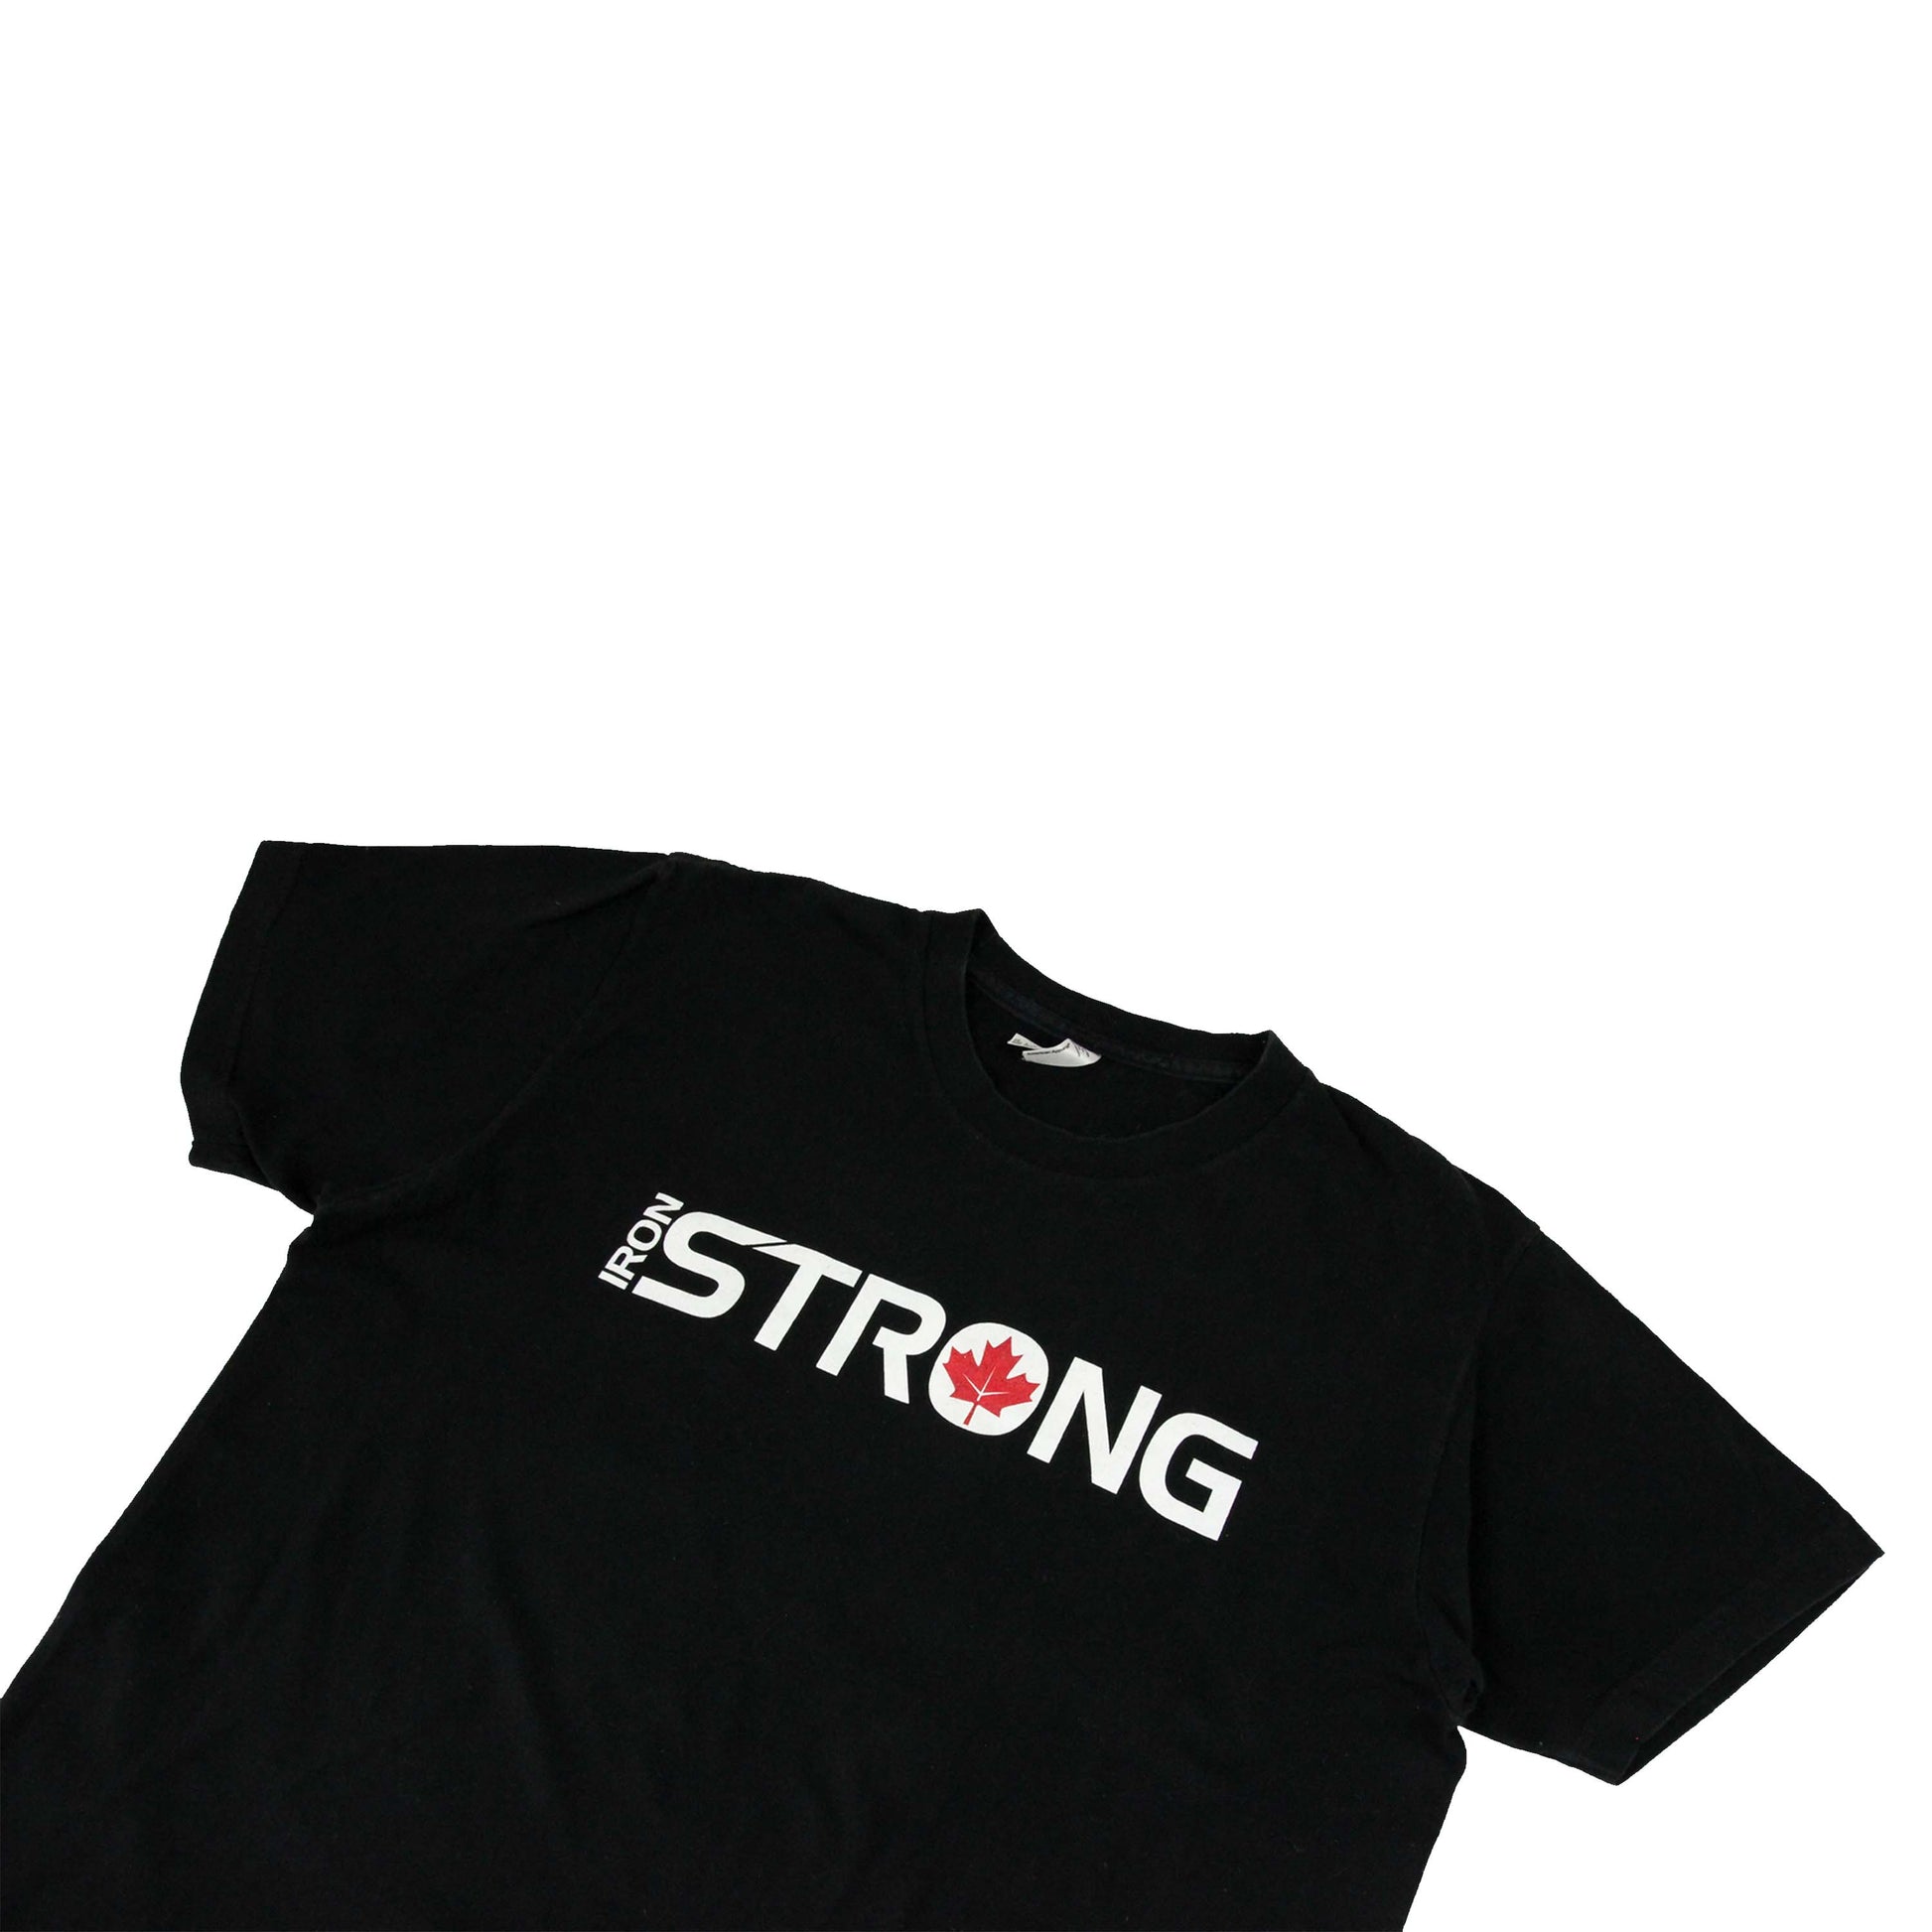 The 'Iron Strong Canada' powerlifting t-shirt | Iron Strong Apparel